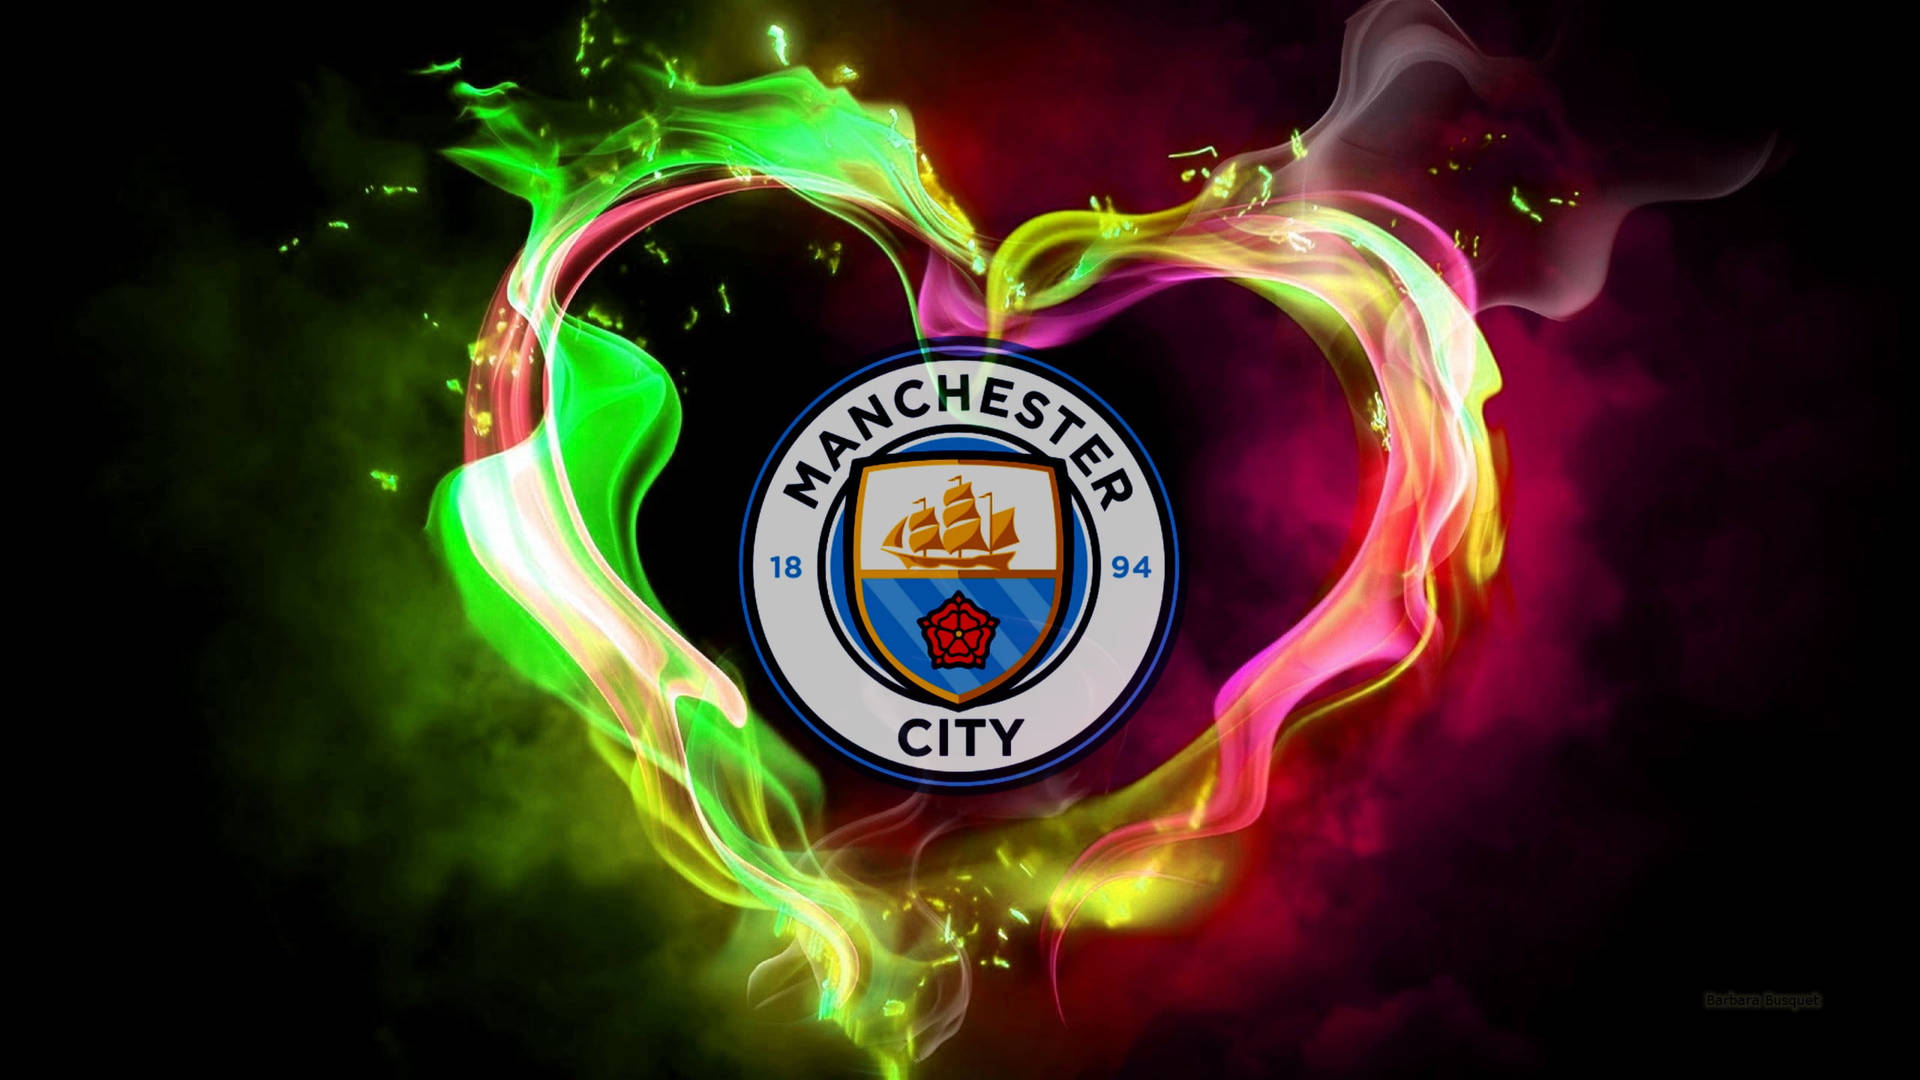 Light up the City of Manchester with the Manchester City Neon Heart Logo Wallpaper